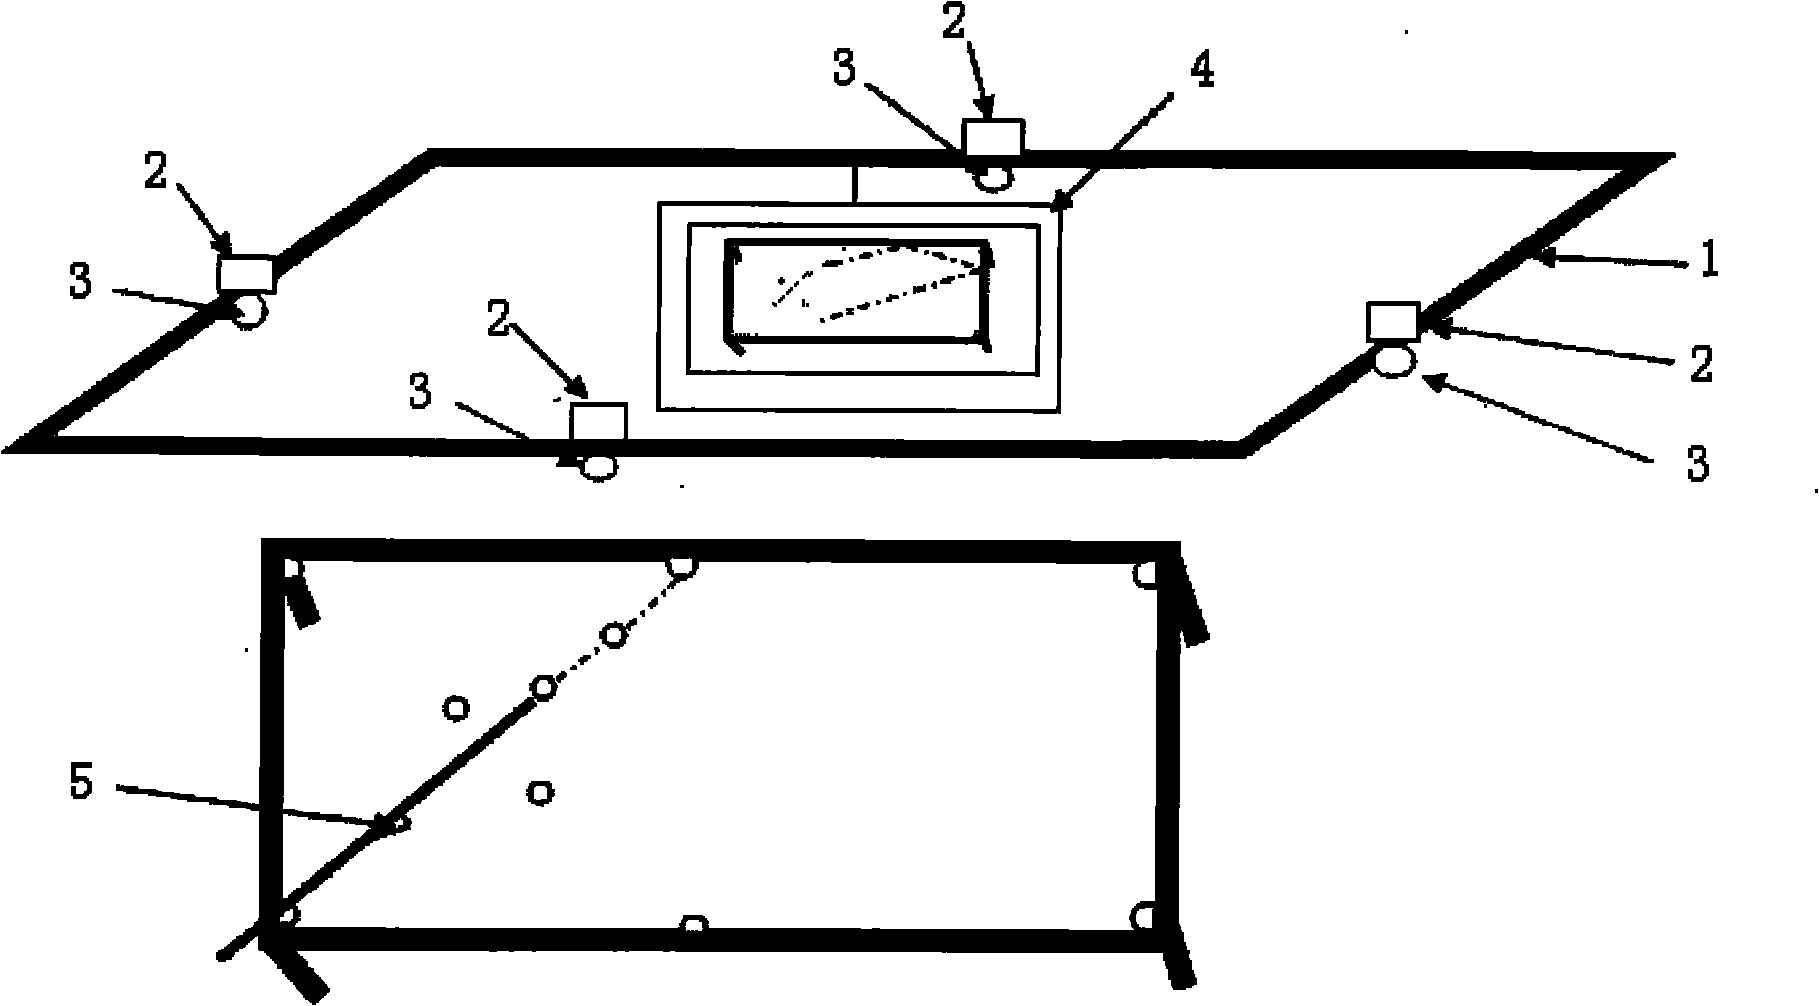 Television system for analyzing displacement of billiards